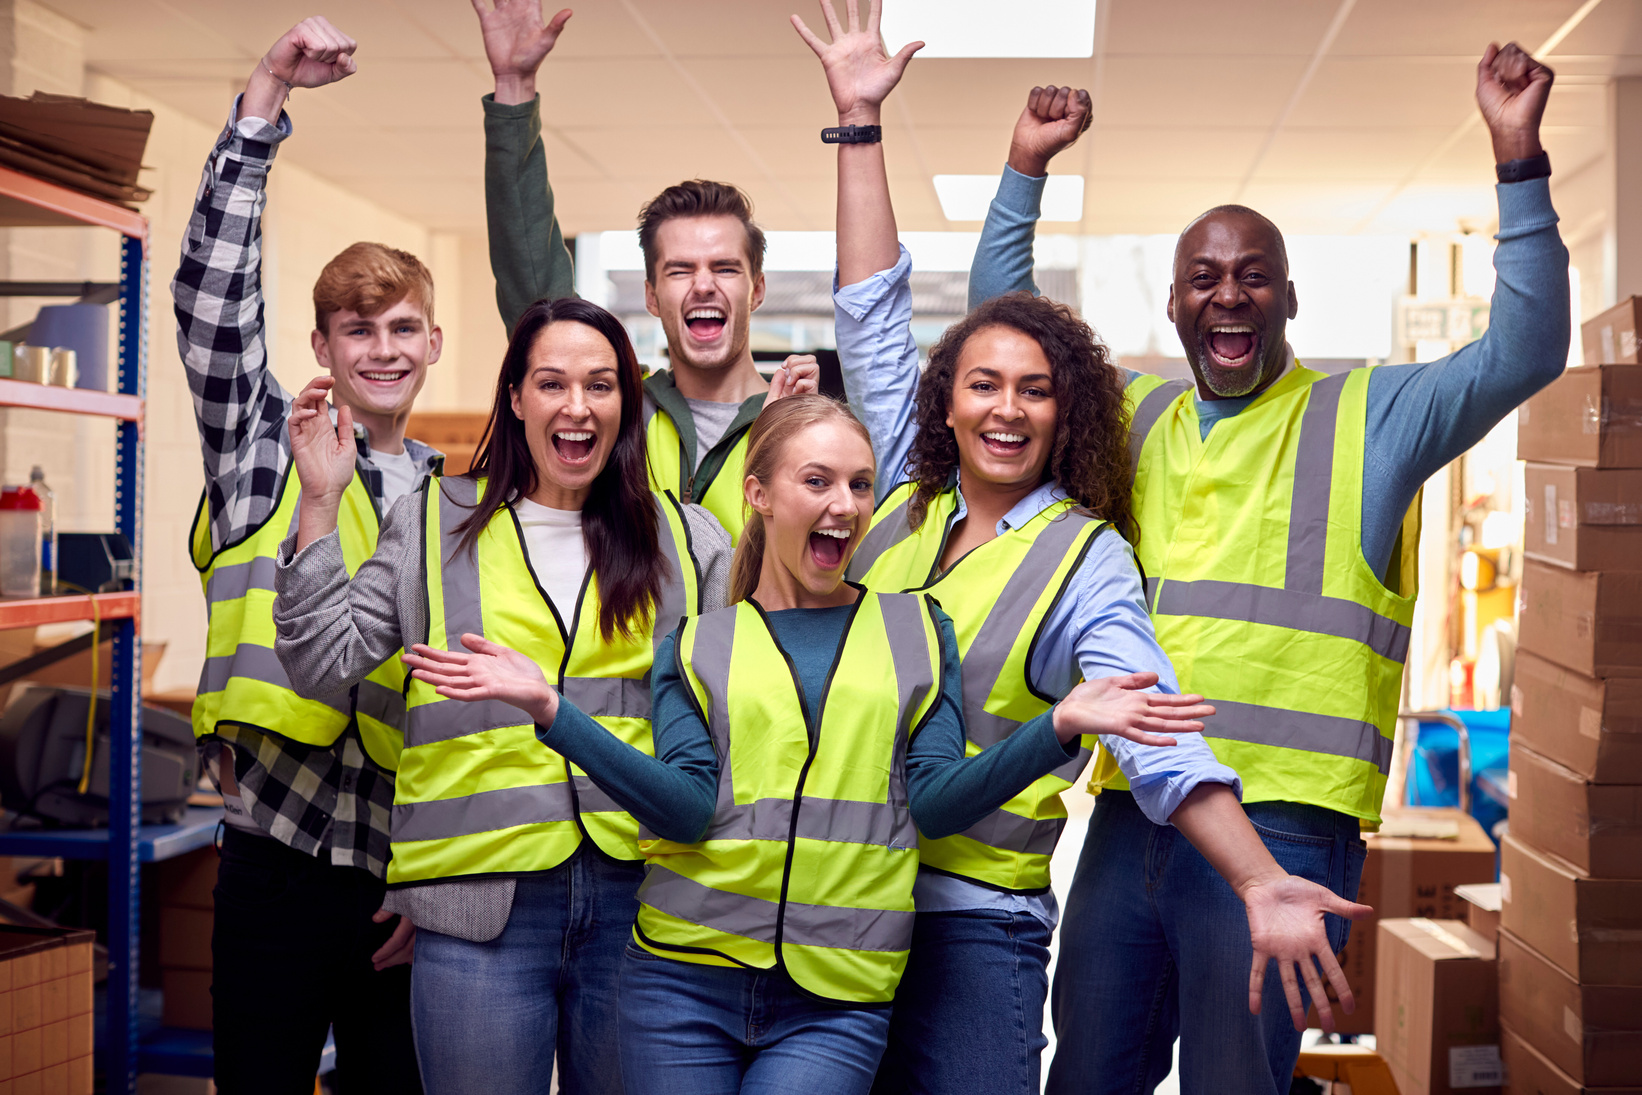 Portrait of Cheering Multi-Cultural Team Wearing Hi-Vis Safety Clothing Working in Modern Warehouse